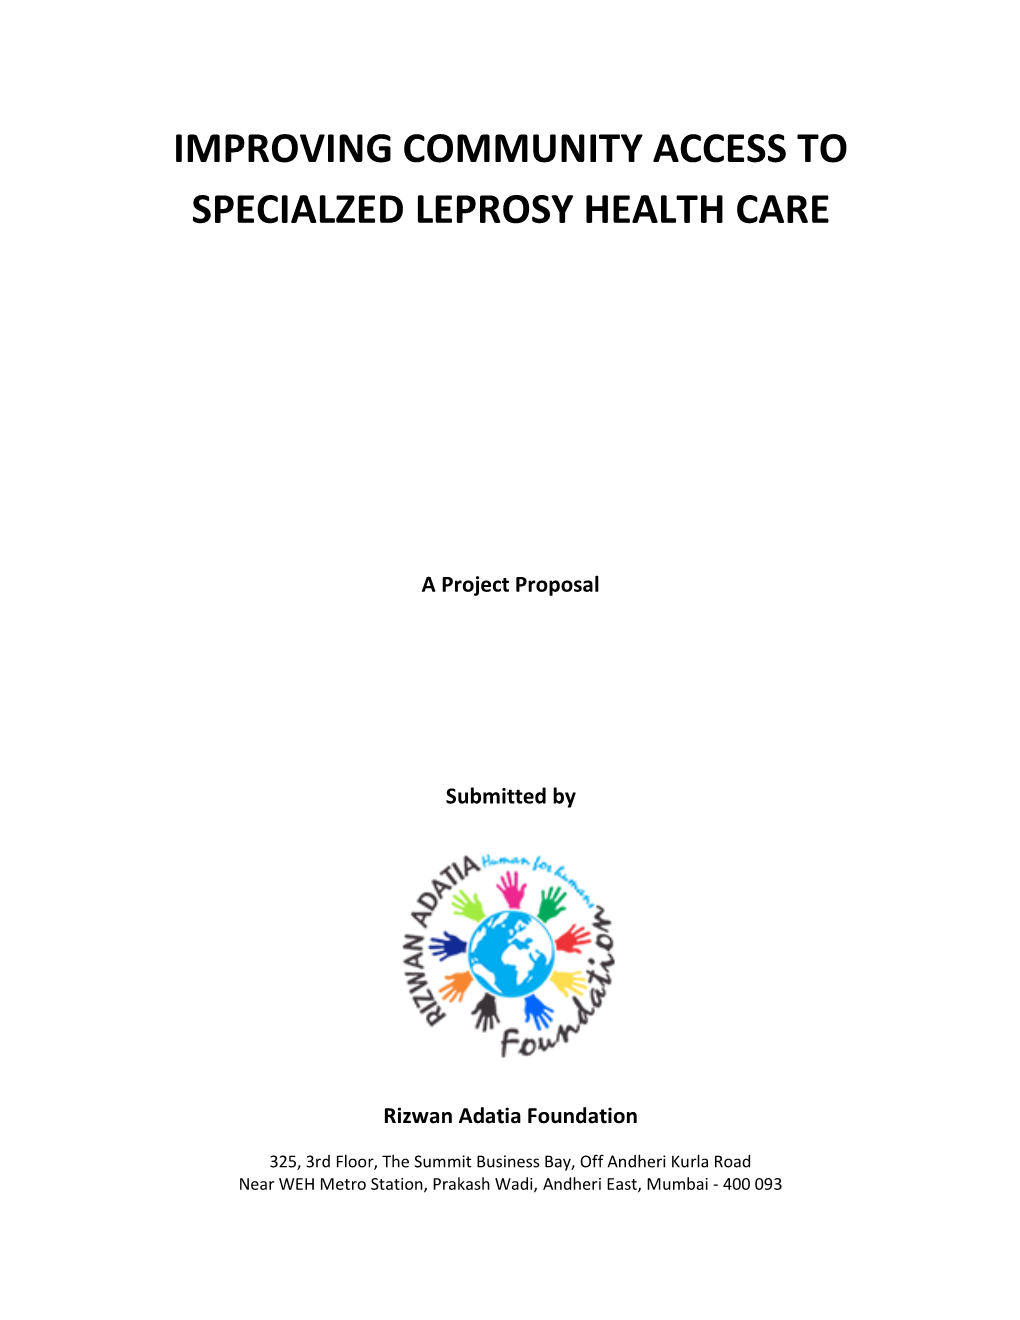 Improving Community Access to Specialzed Leprosy Health Care